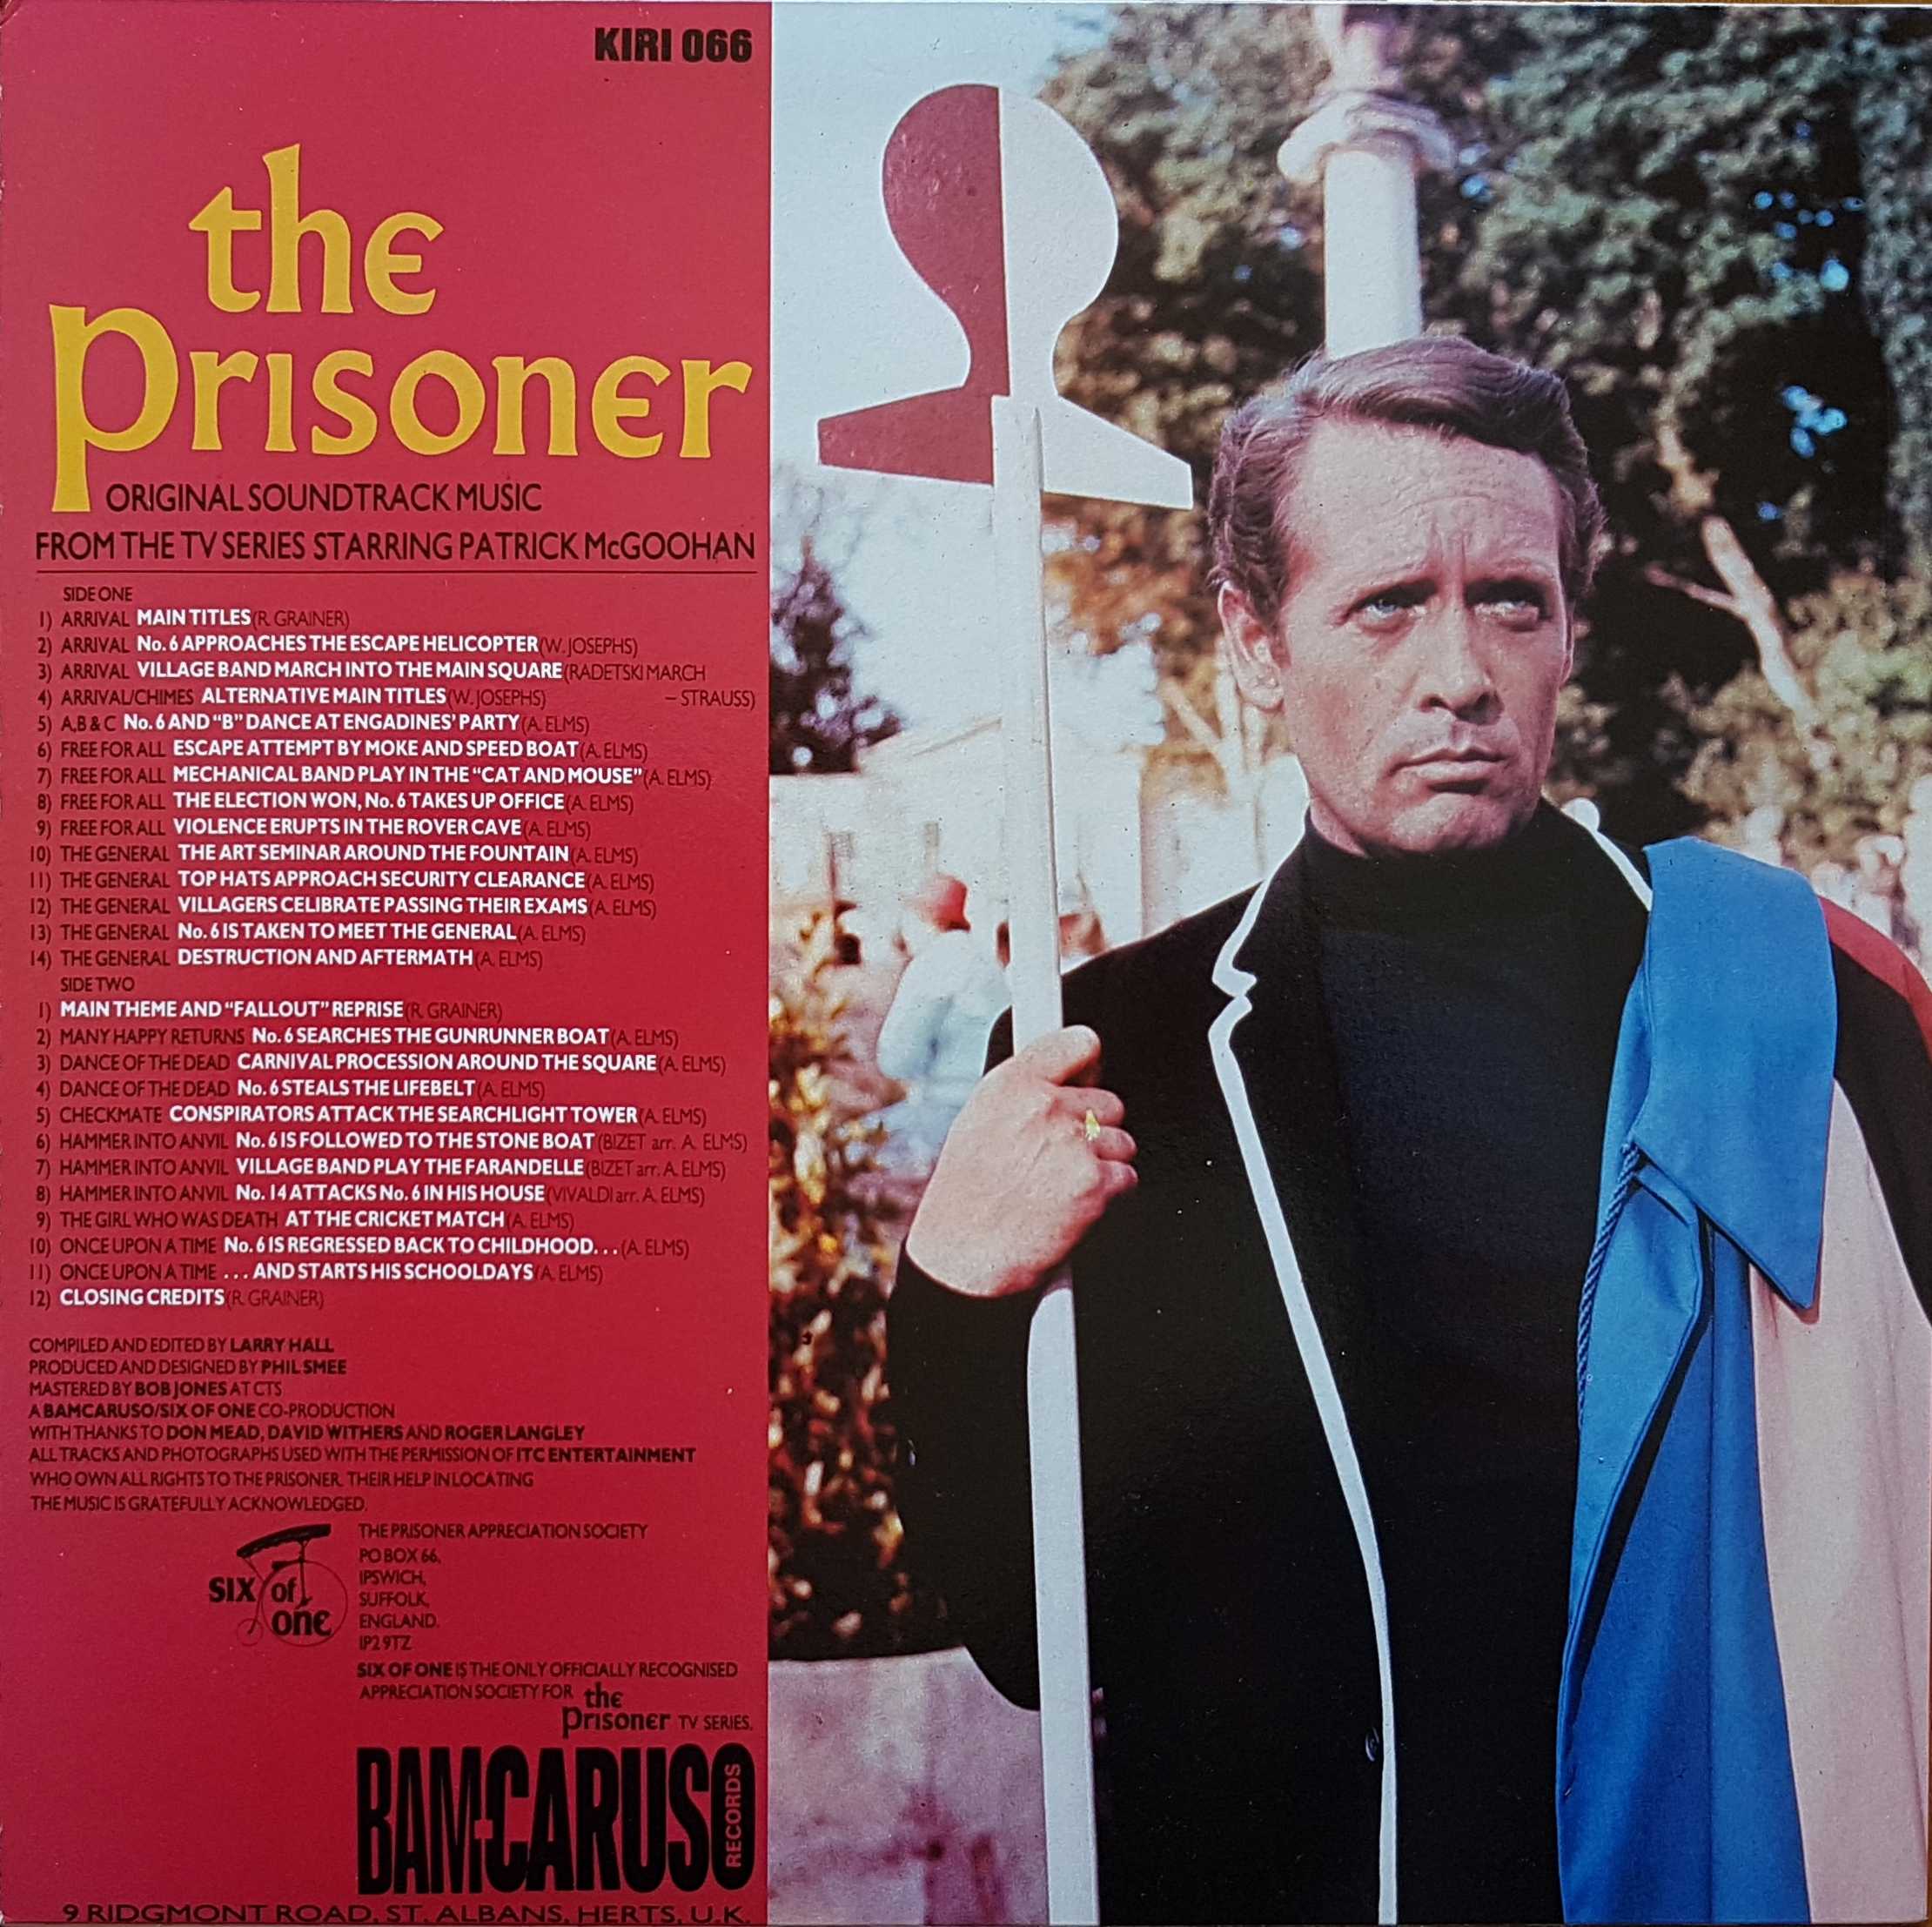 Picture of KIWI 066 The prisoner by artist Various from ITV, Channel 4 and Channel 5 library